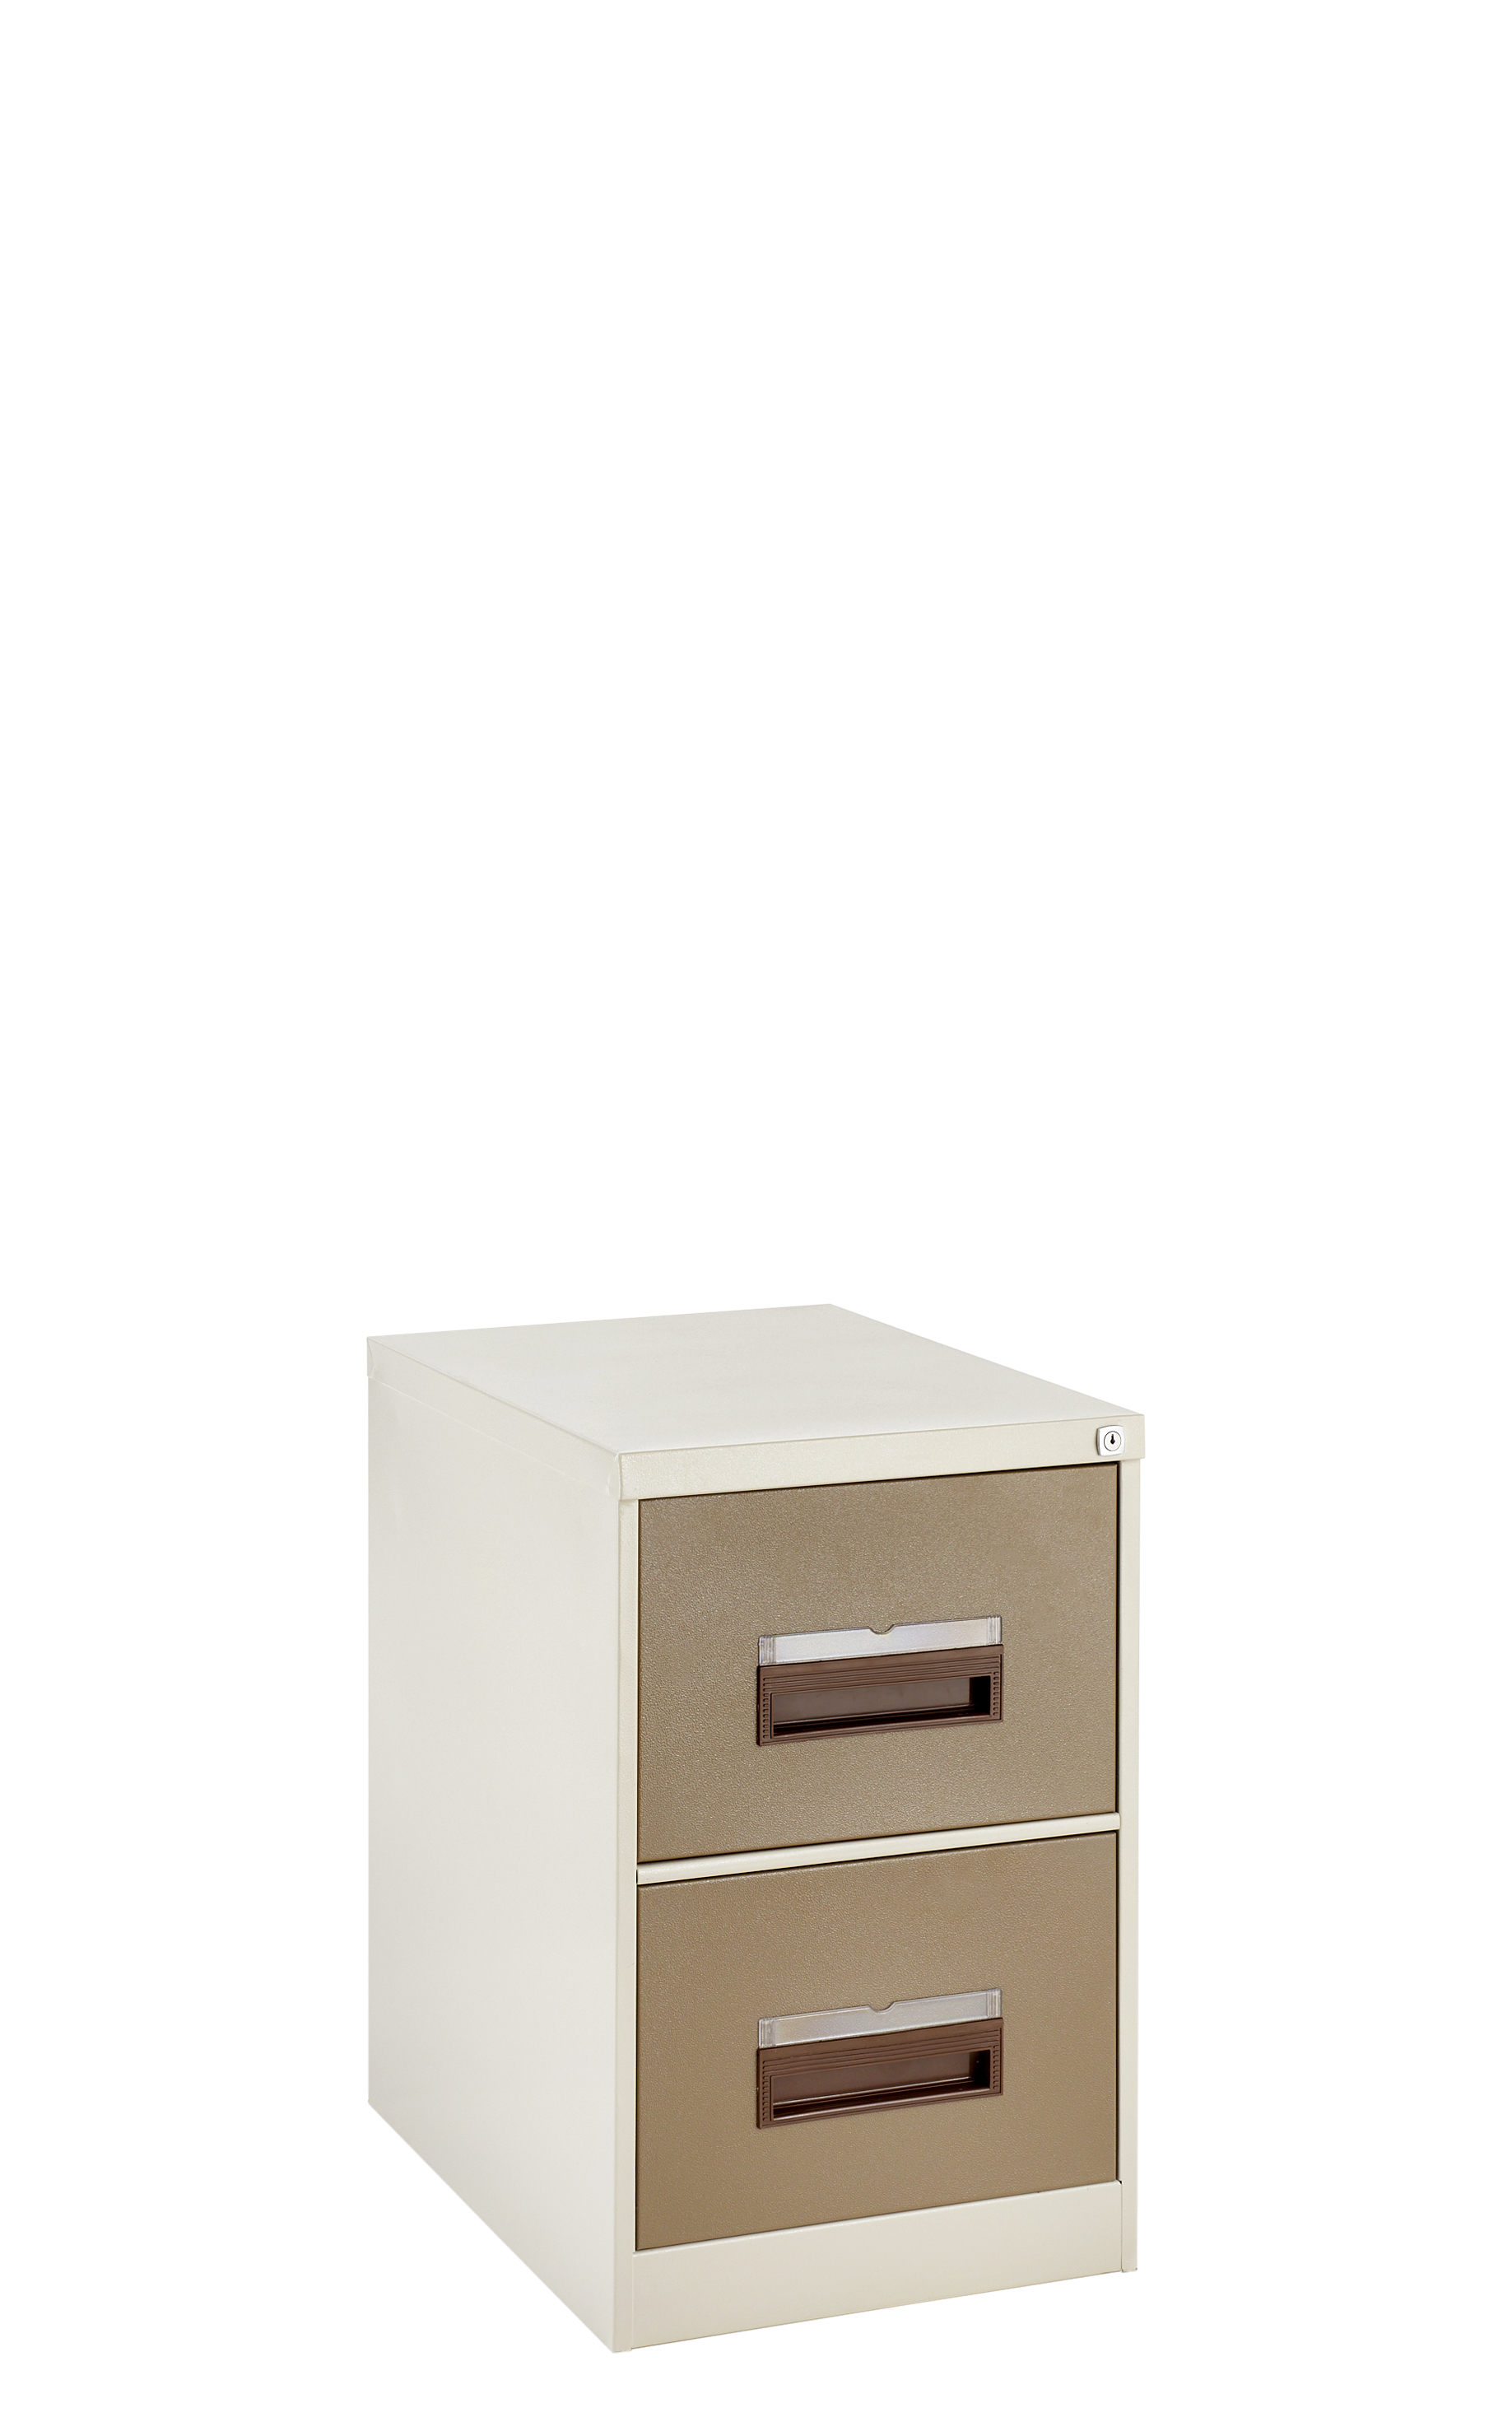 2 Drawer Steel Filing Cabinets At Discounted Prices Shop Online